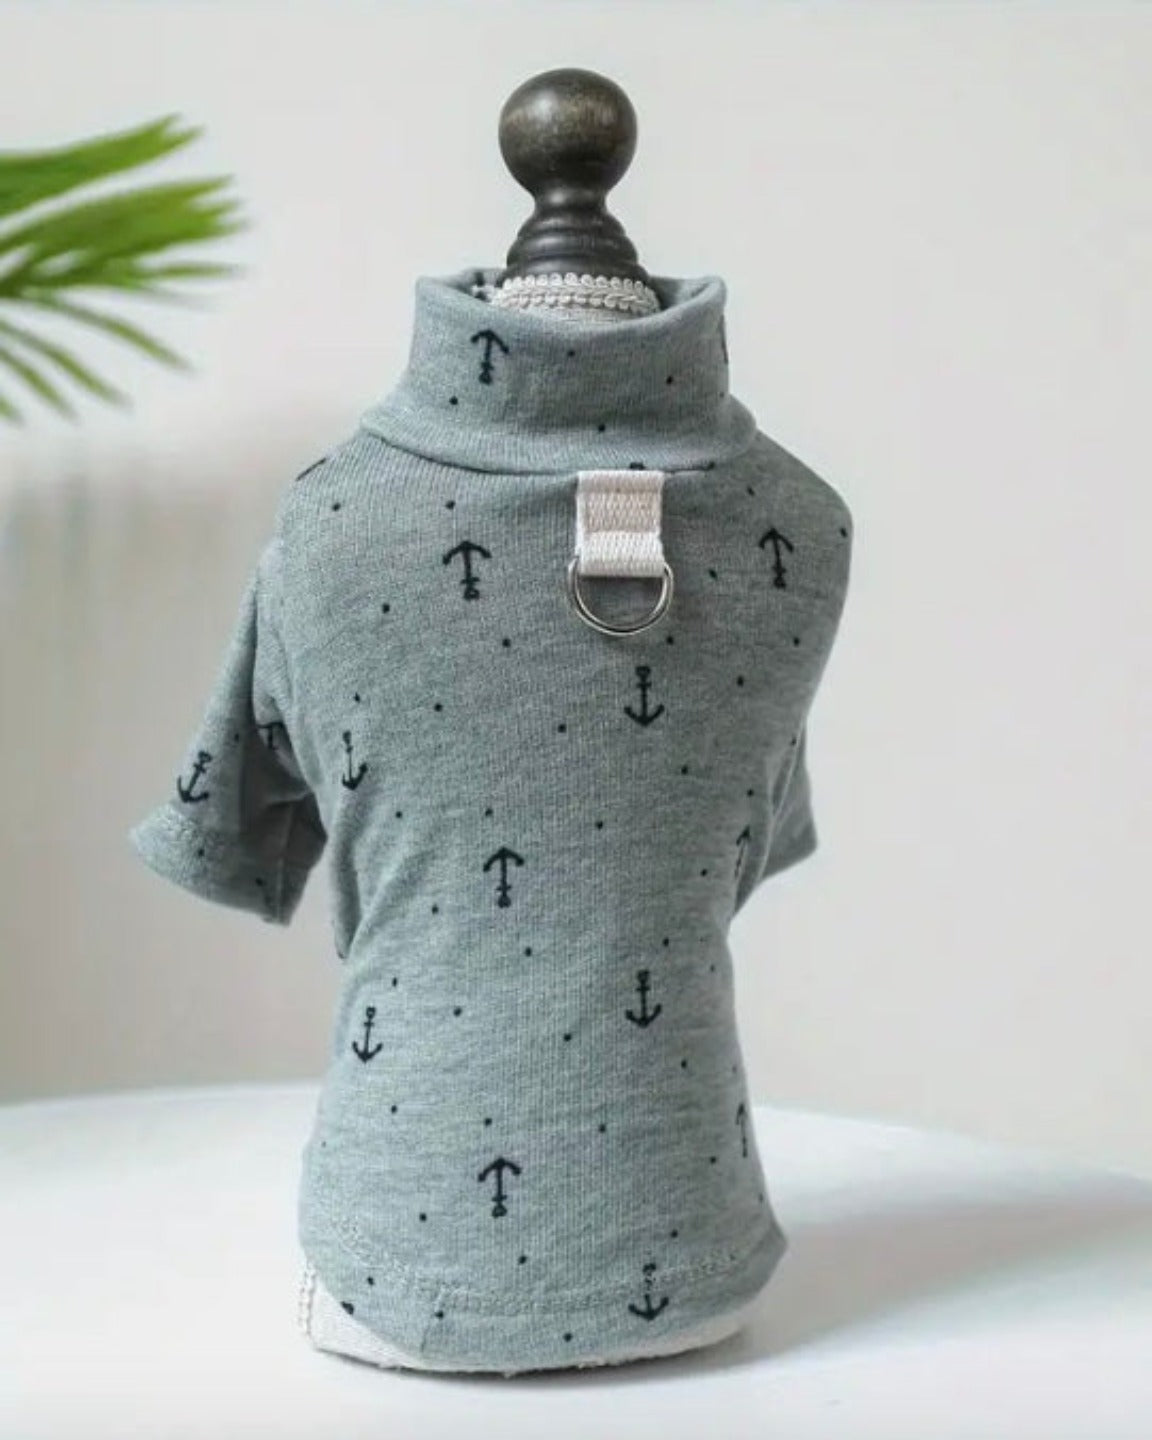 The green boat anchor sweater